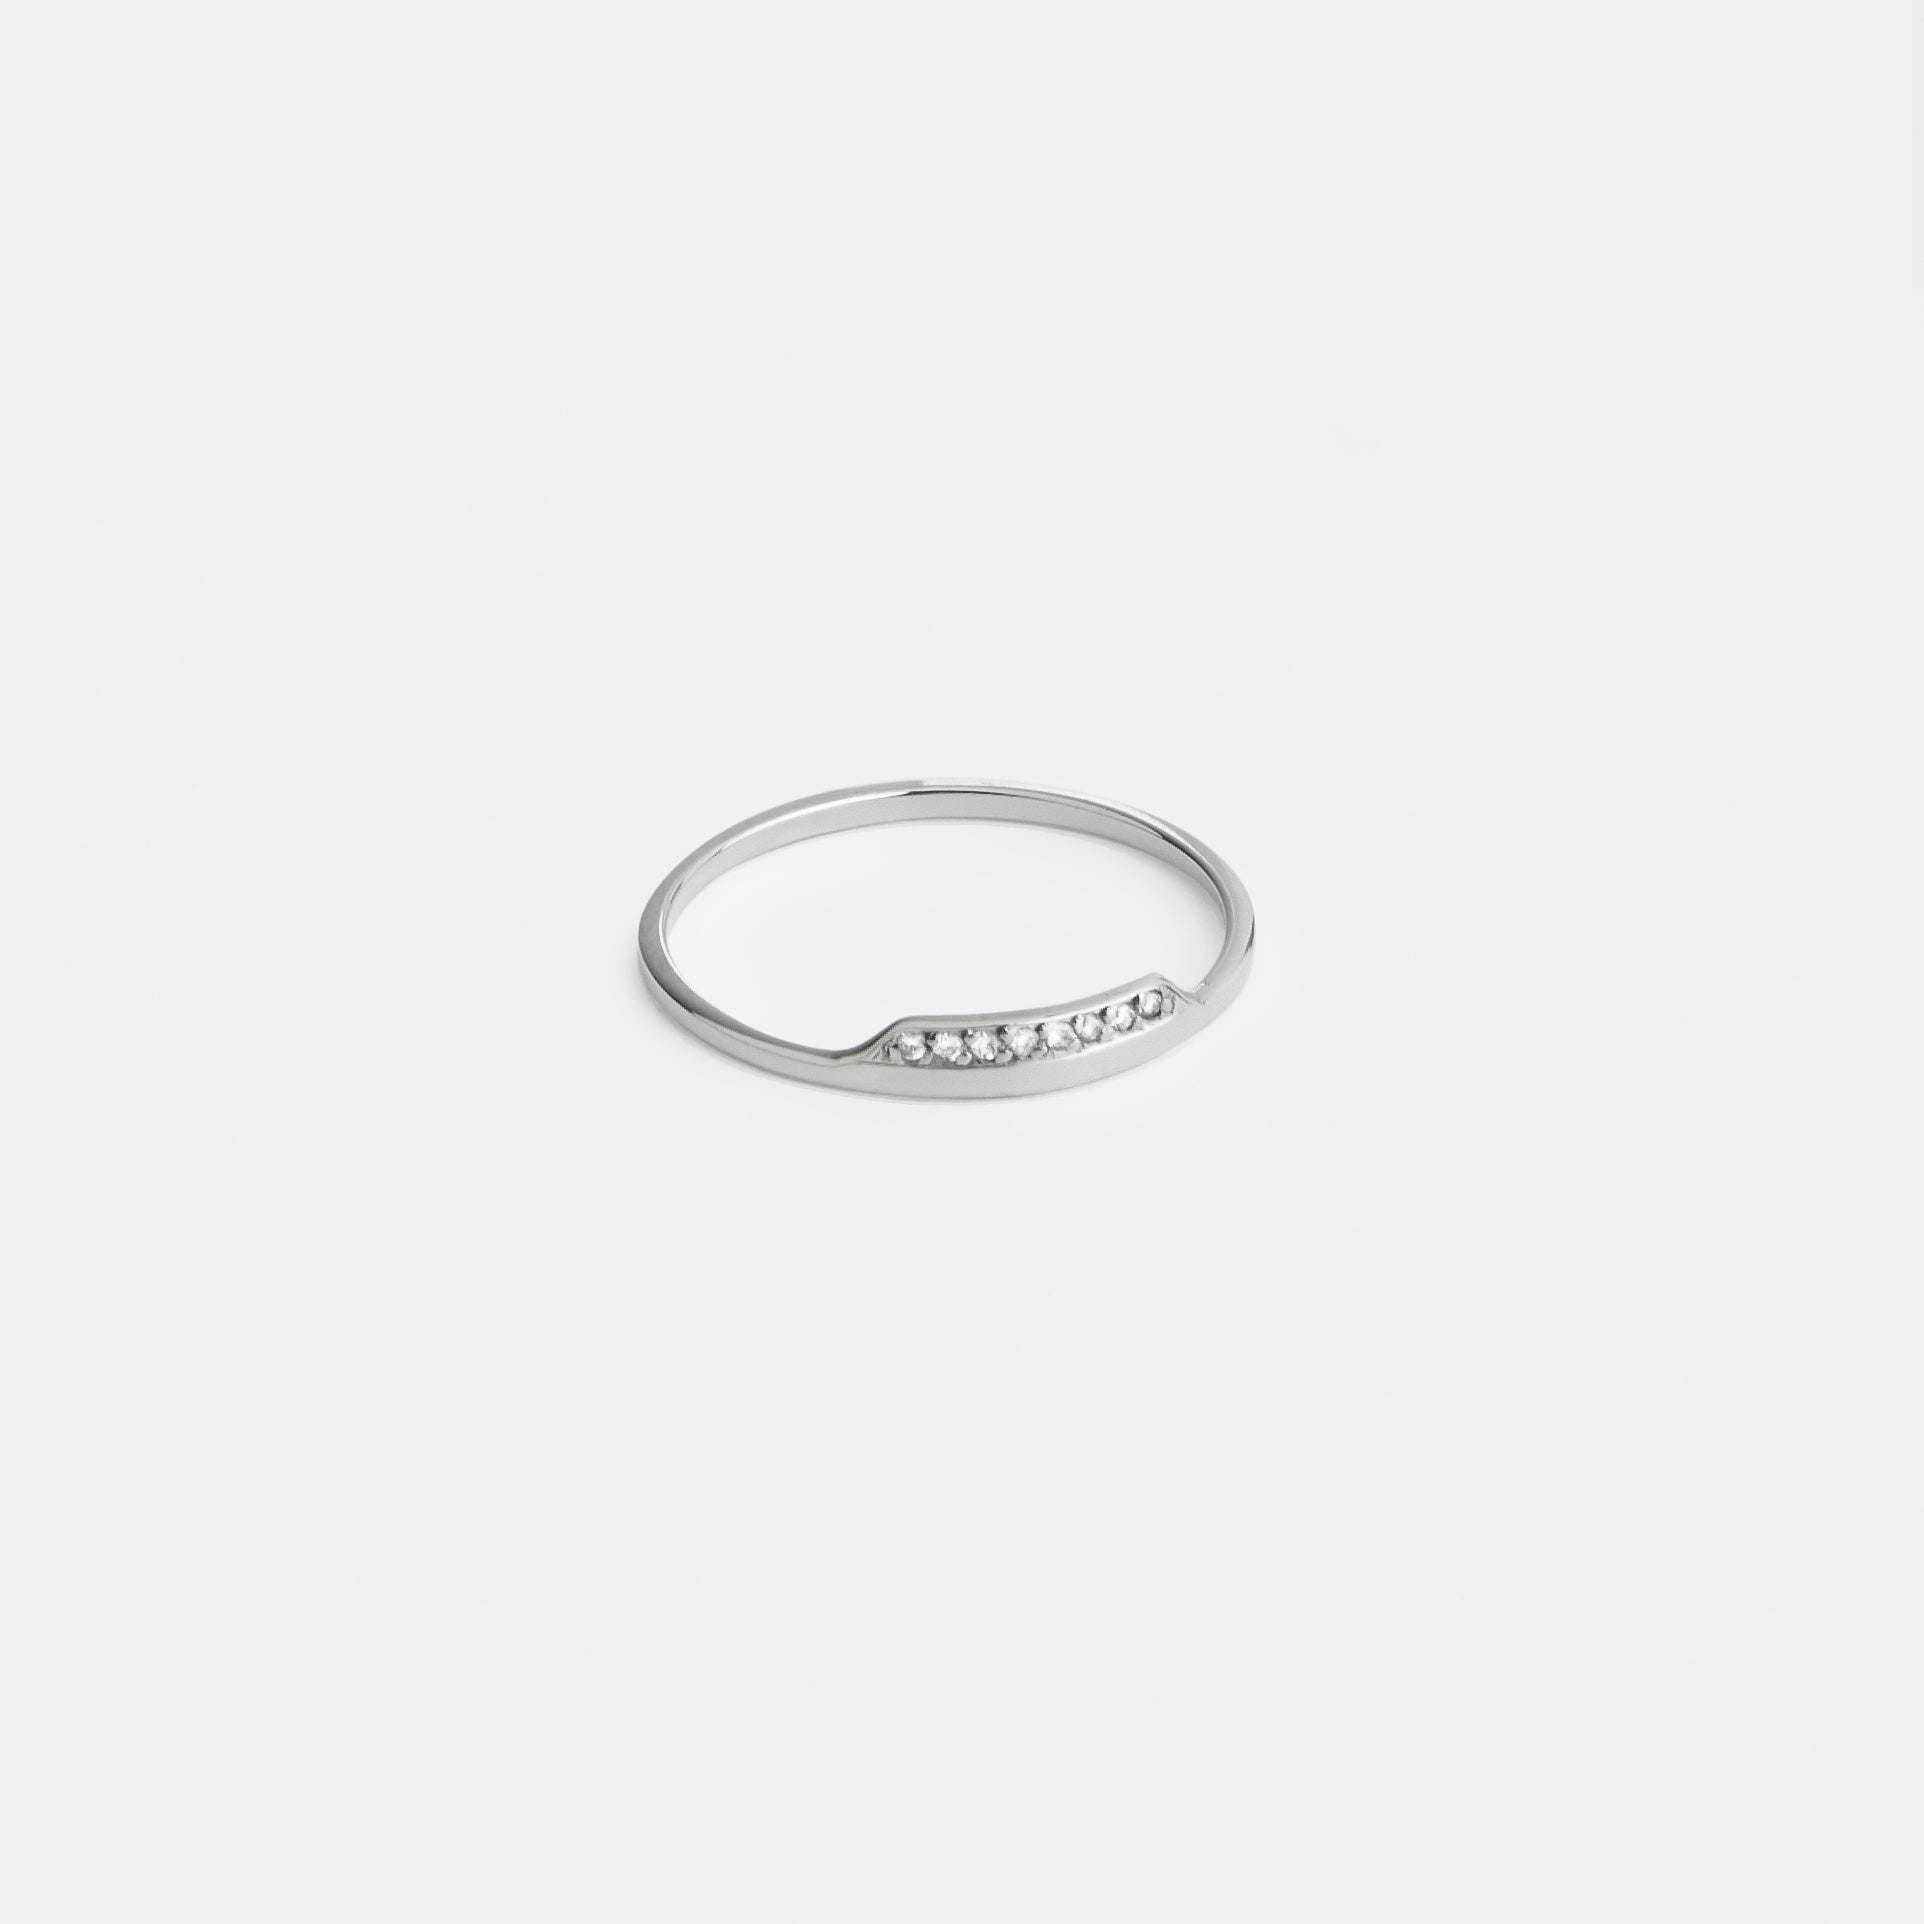 Salo Thin Ring in 14k White Gold set with White Diamonds By SHW Fine Jewelry NYC